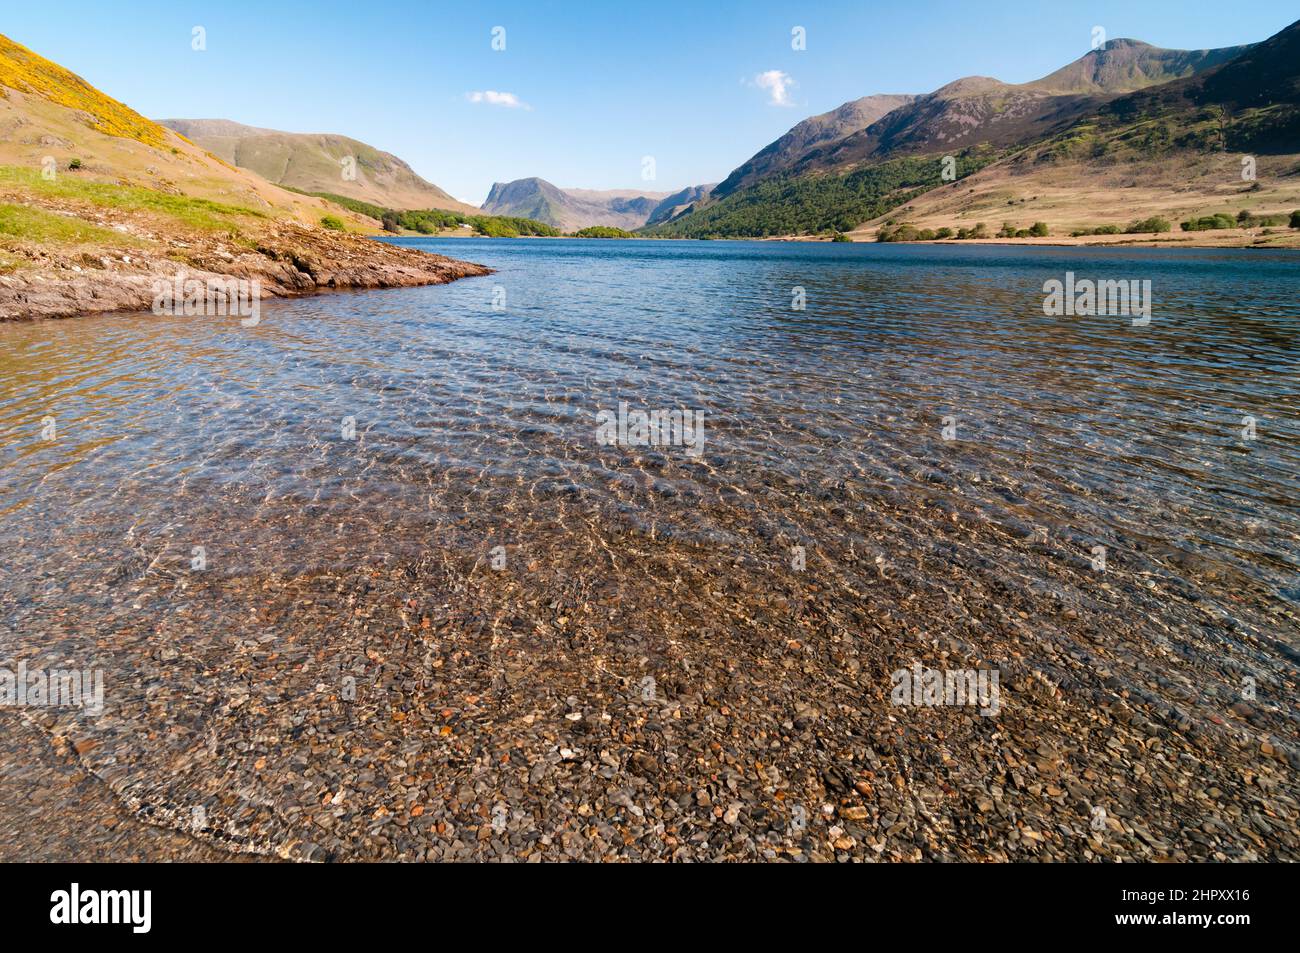 View of Crummock Water and and the surrounding fells of the Buttermere Valley in the Lake District in Cumbria, England. Stock Photo